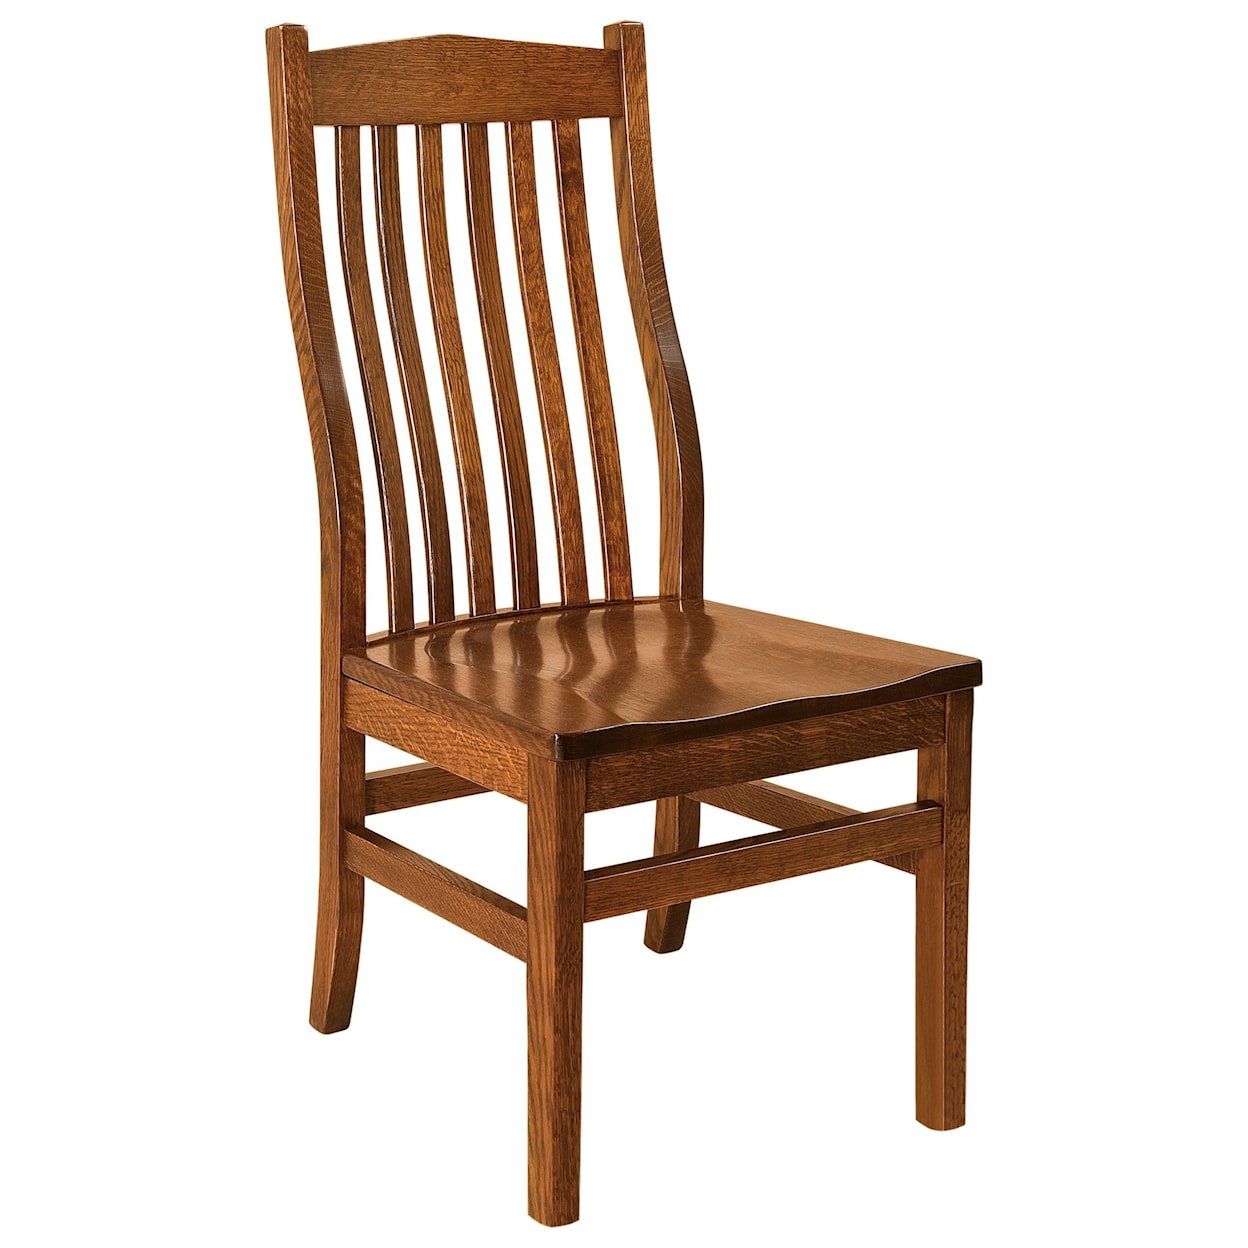 F&N Woodworking Sullivan Side Chair - Leather Seat